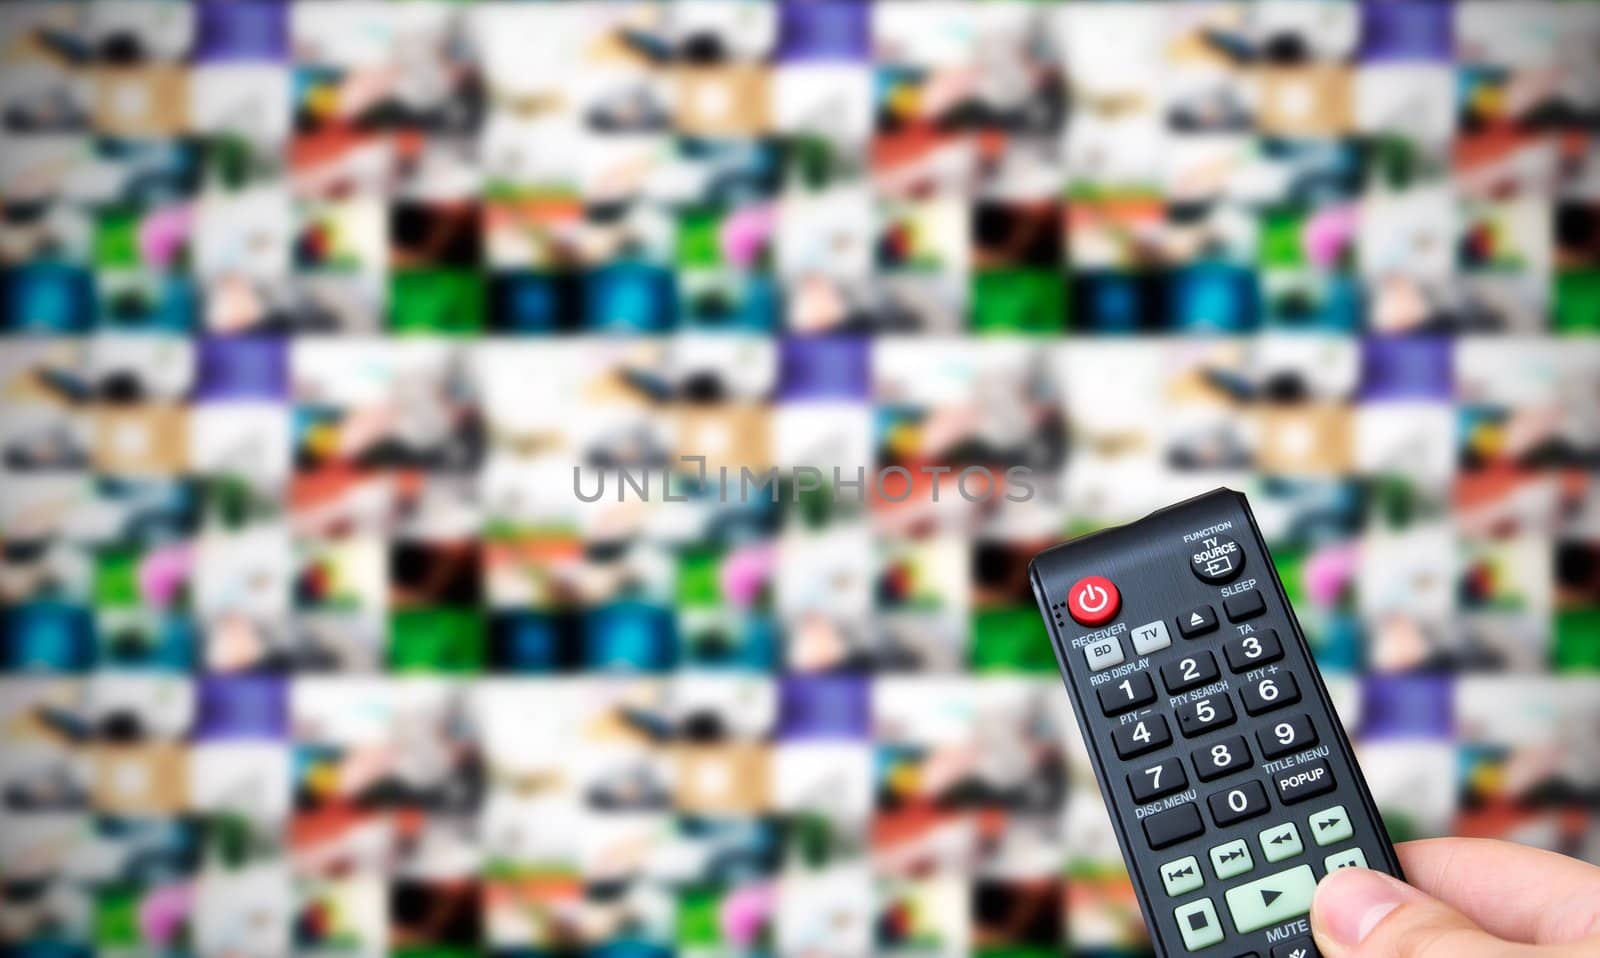 Remote control. Multiple images gallery panel in background